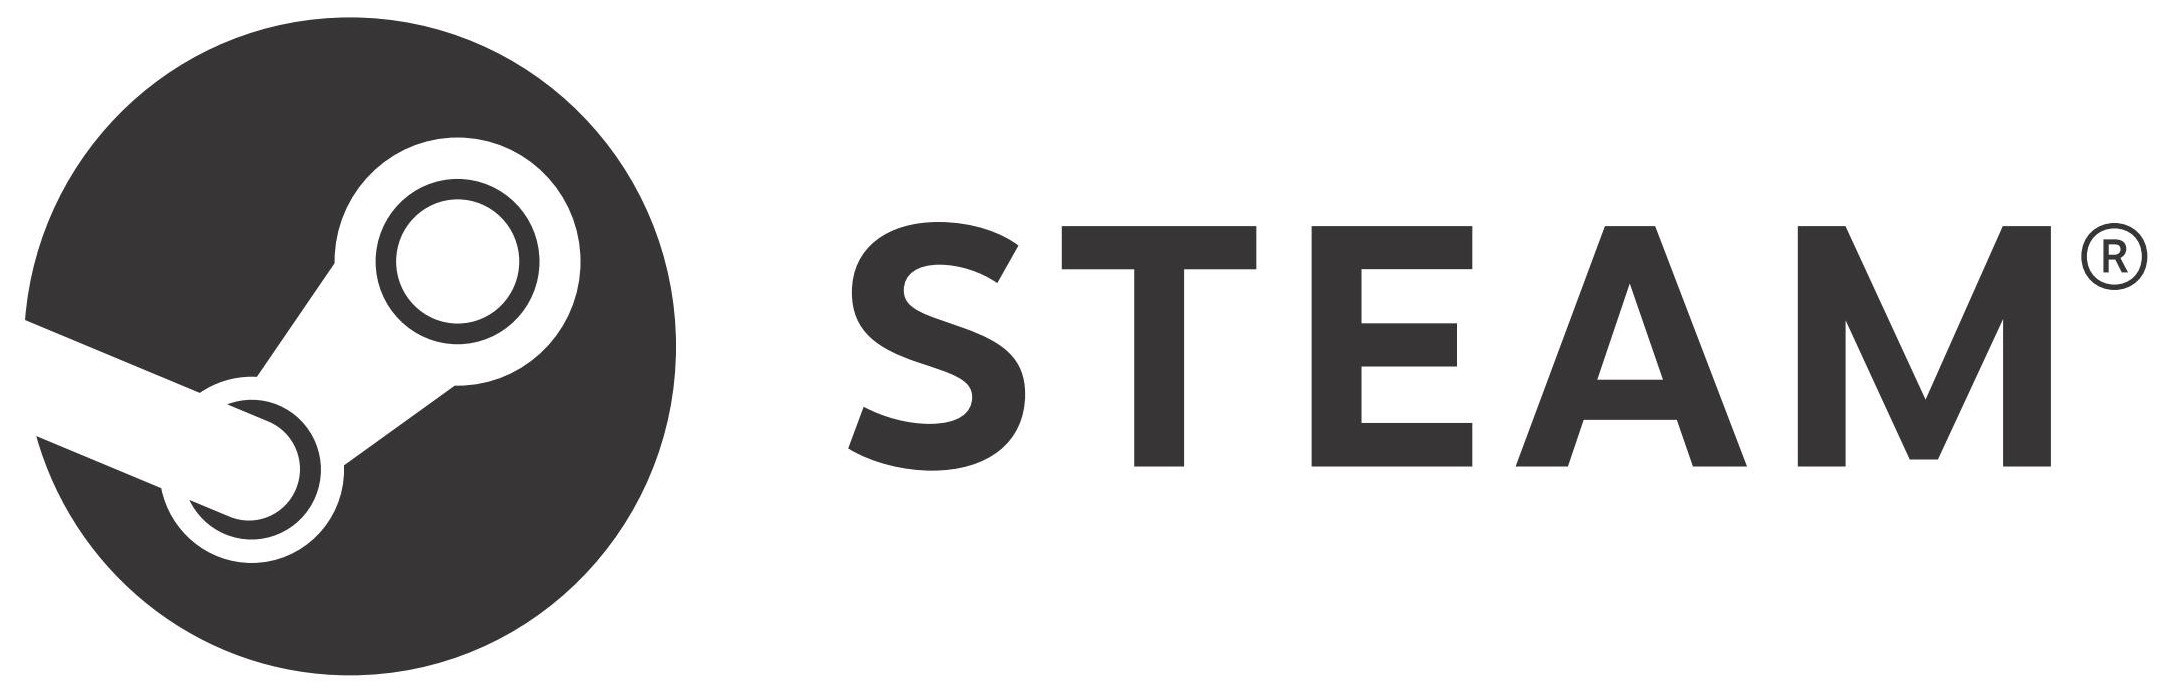 New_Steam_Logo_with_name.jpeg